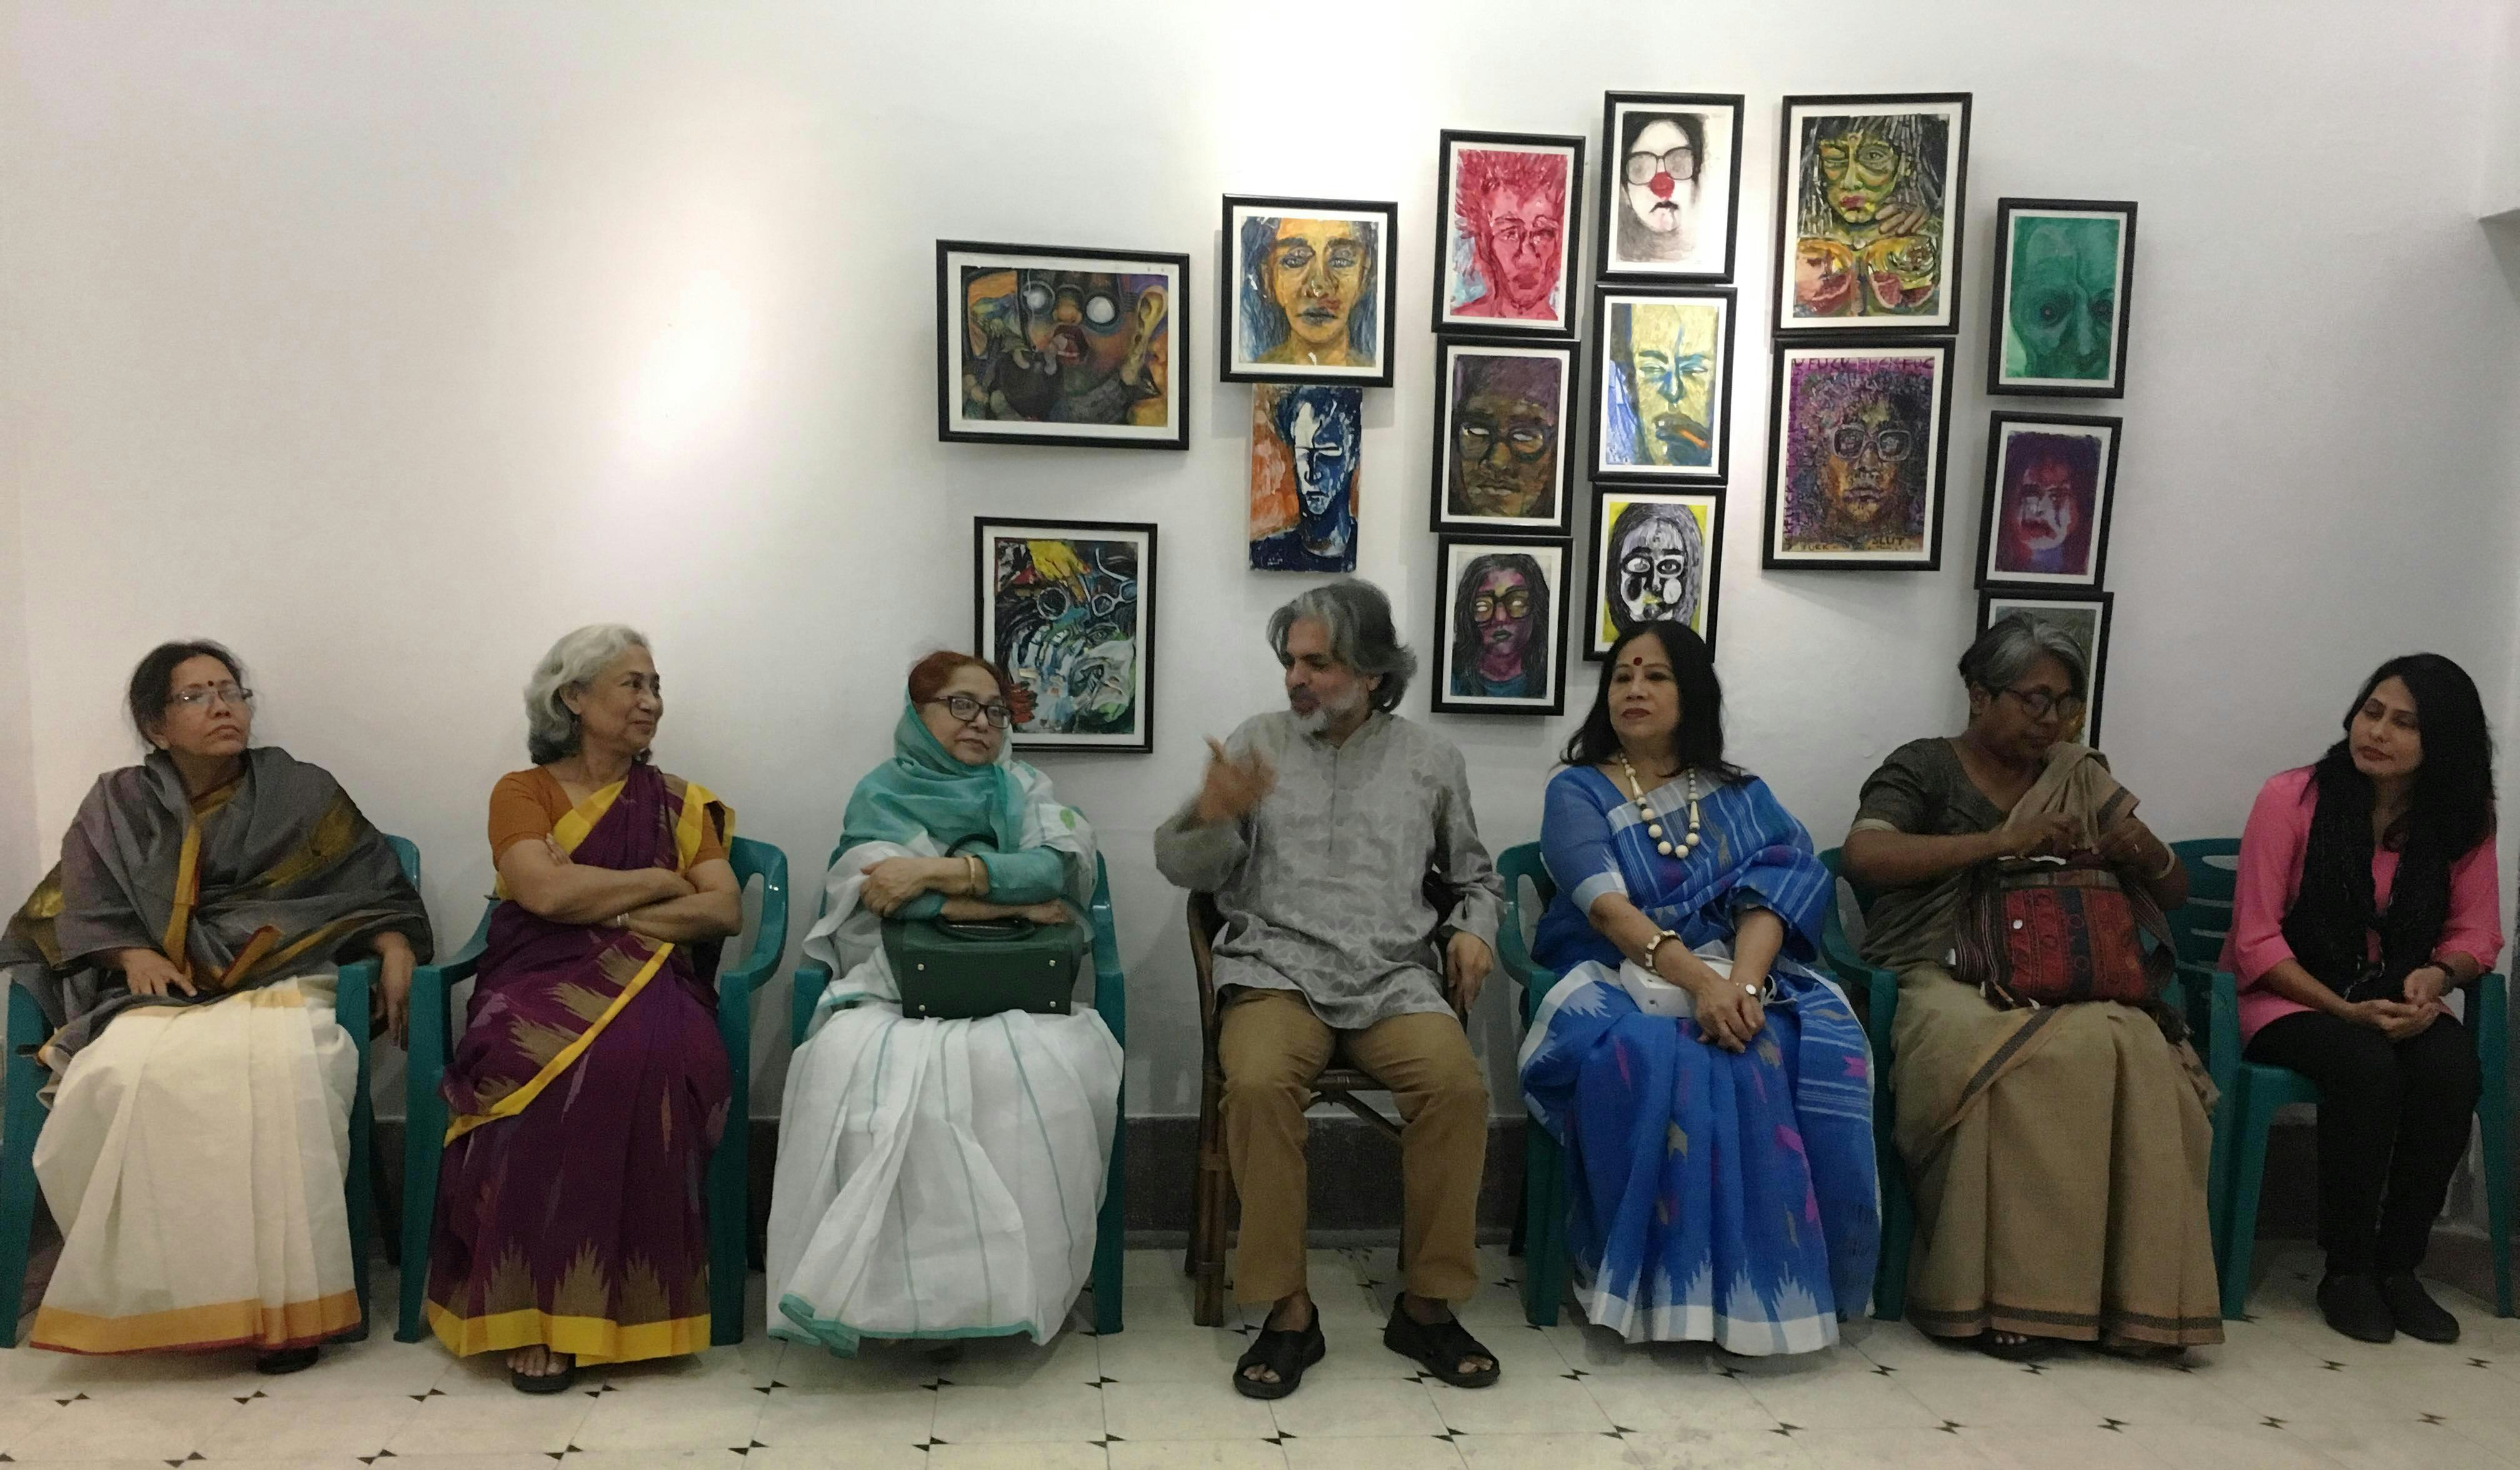 Six female-presenting brown women in saris seated against a wall, with Alam Khorshed seated in the middle talking to them. A series of colourful illustrations are hanging behind them on the wall.